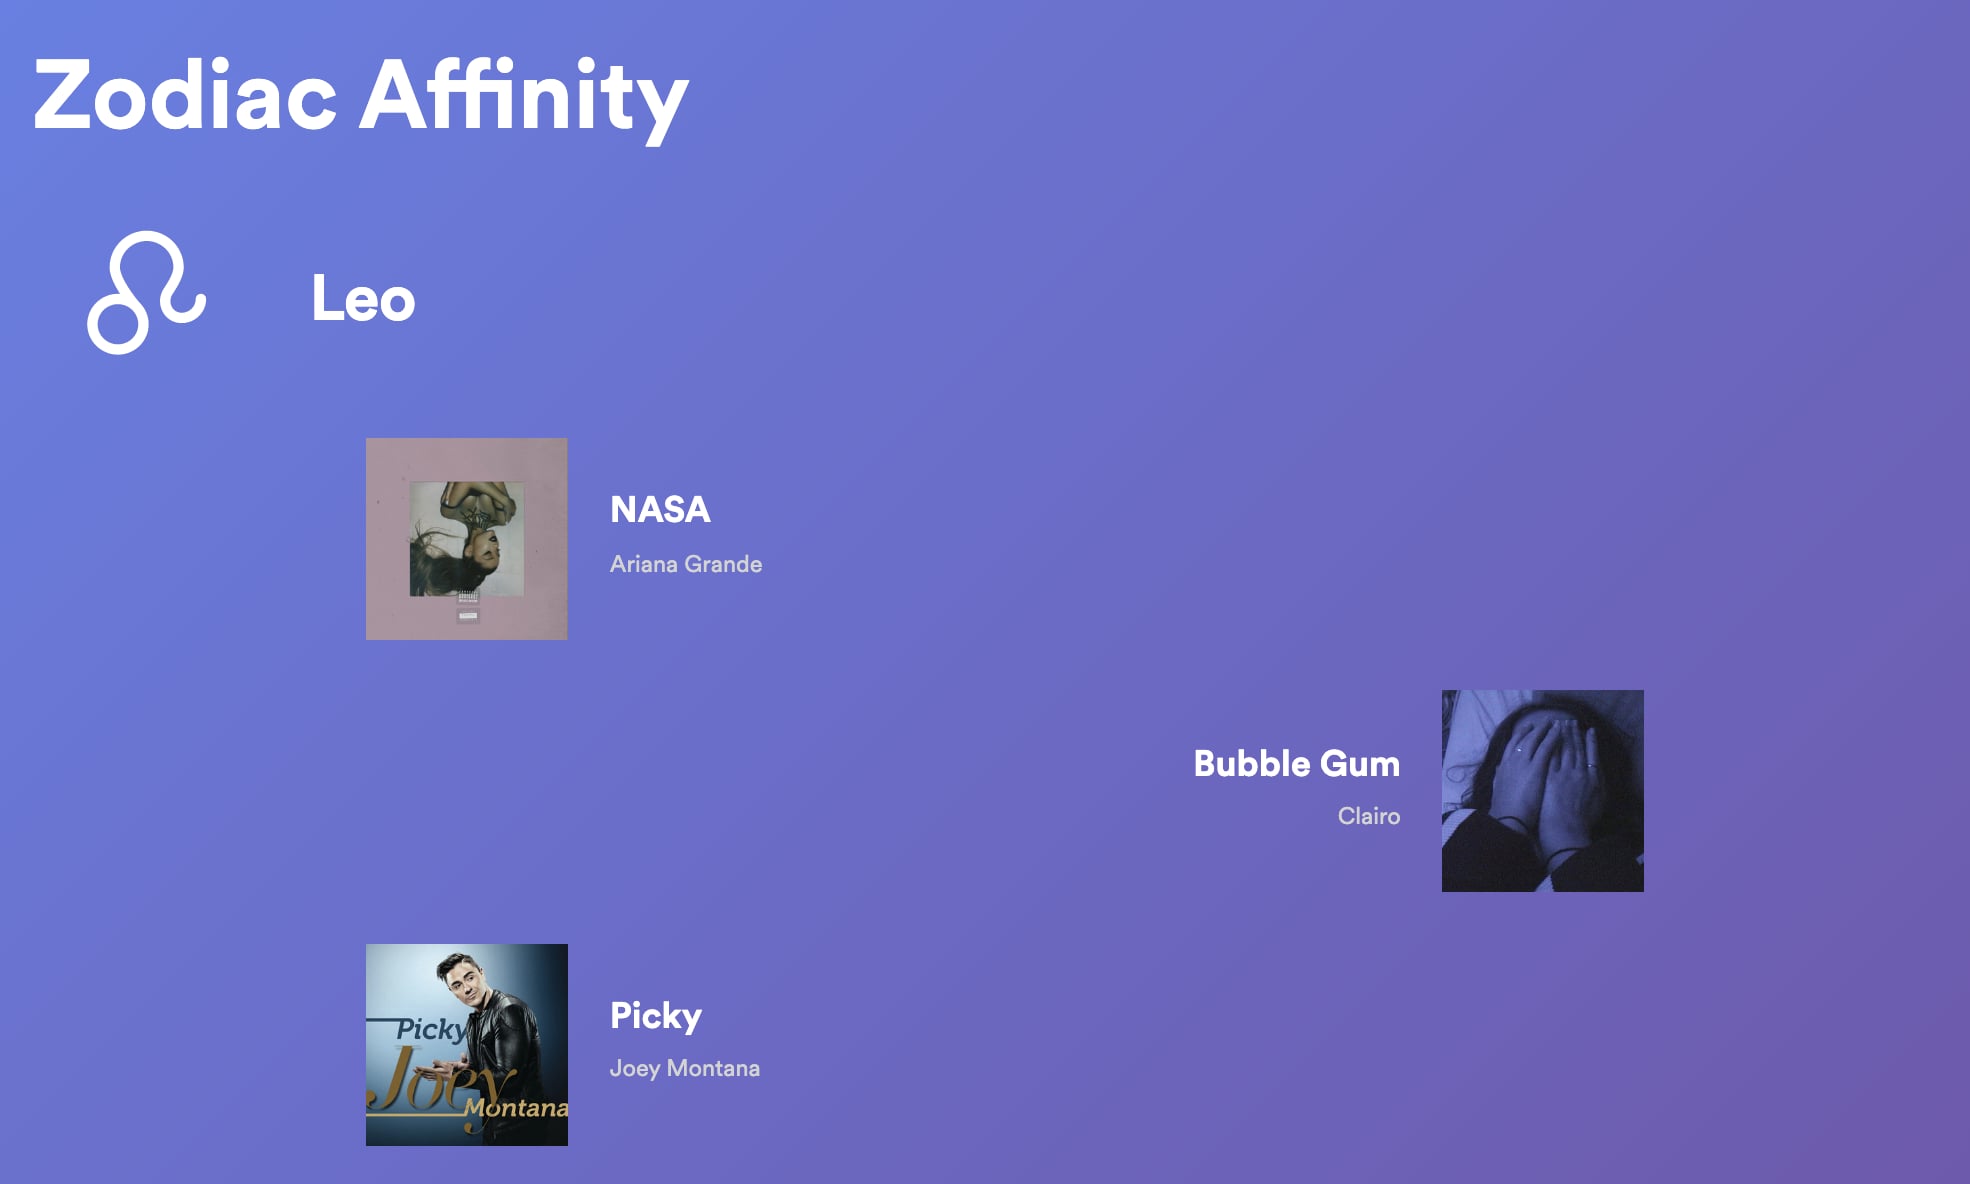 Zodiac Affinity card for Leo is purple with white letters. Songs included are NASA by Ariana Grande, Bubble Gum by Clairo, and Picky by Joey Montana.